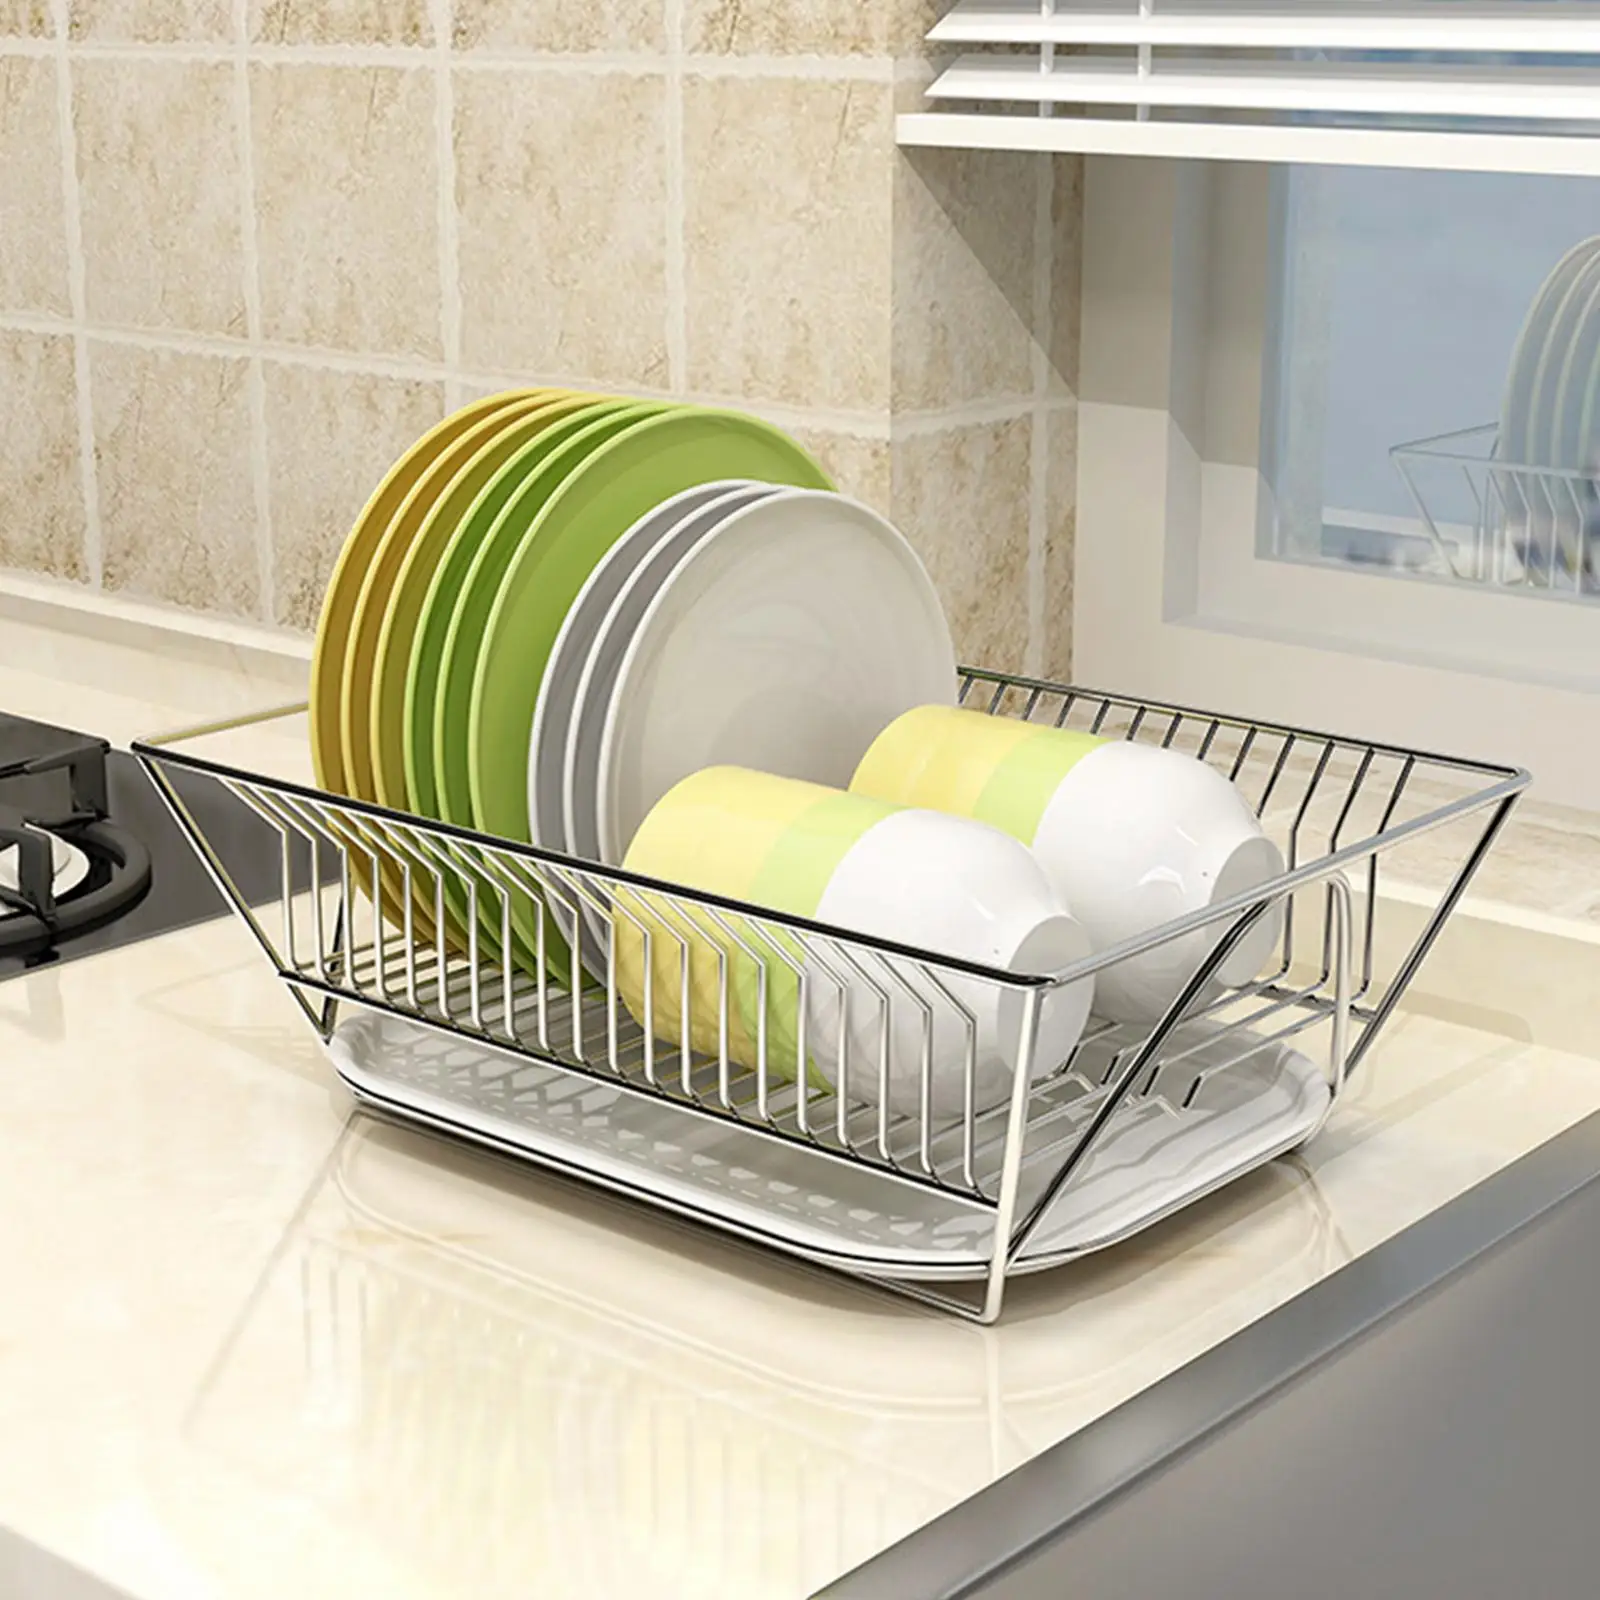 Dish Rack with Drainboard Storage Steel Dish Drainers Cabinet for Kitchen Counter Removable Shelf Organizer Kitchen Drying Rack